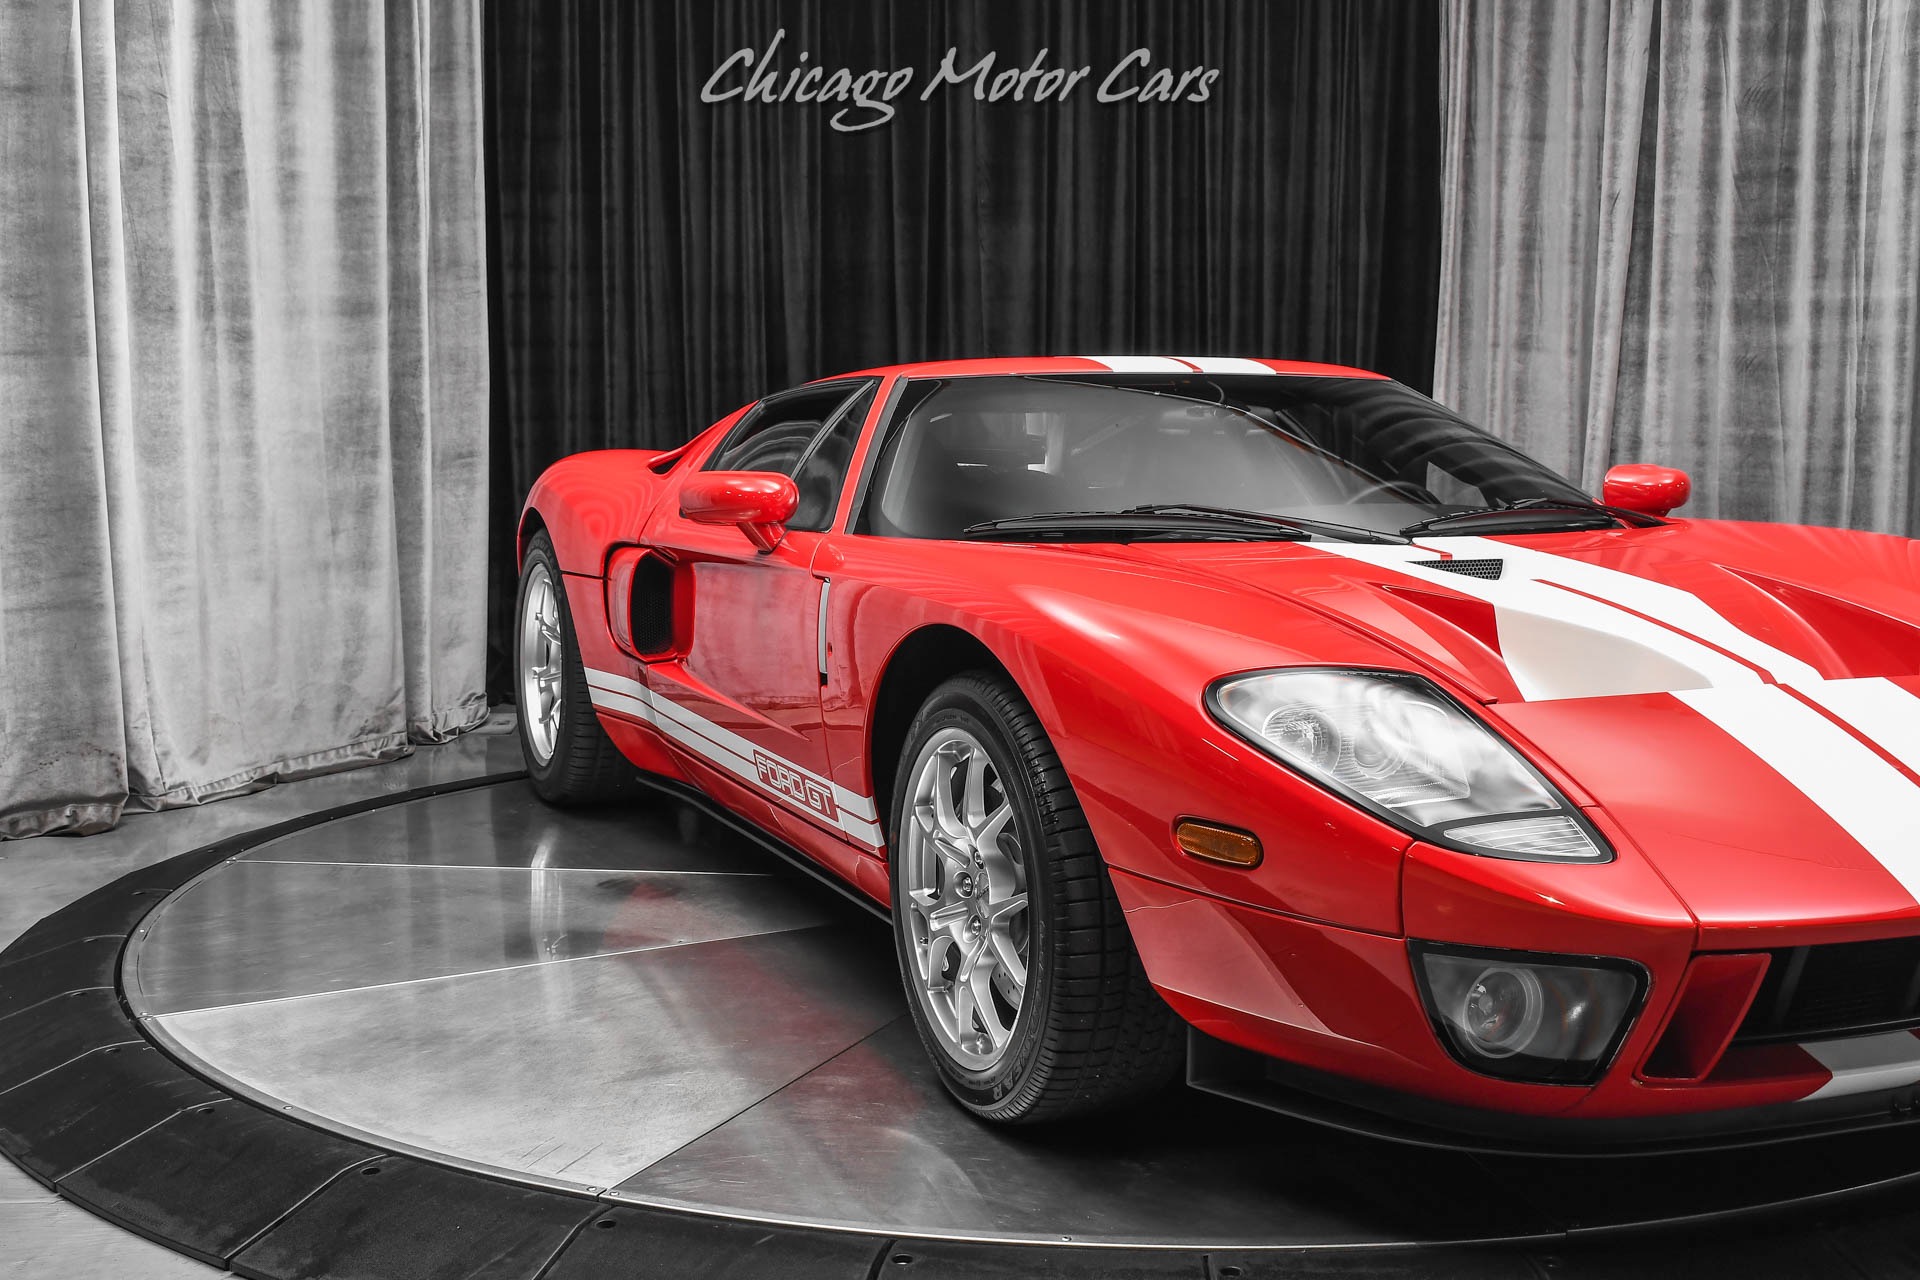 Used-2006-Ford-GT-Coupe-ONLY-1300-Miles-4-Option-Car-Collector-Quality-Example-STUNNING